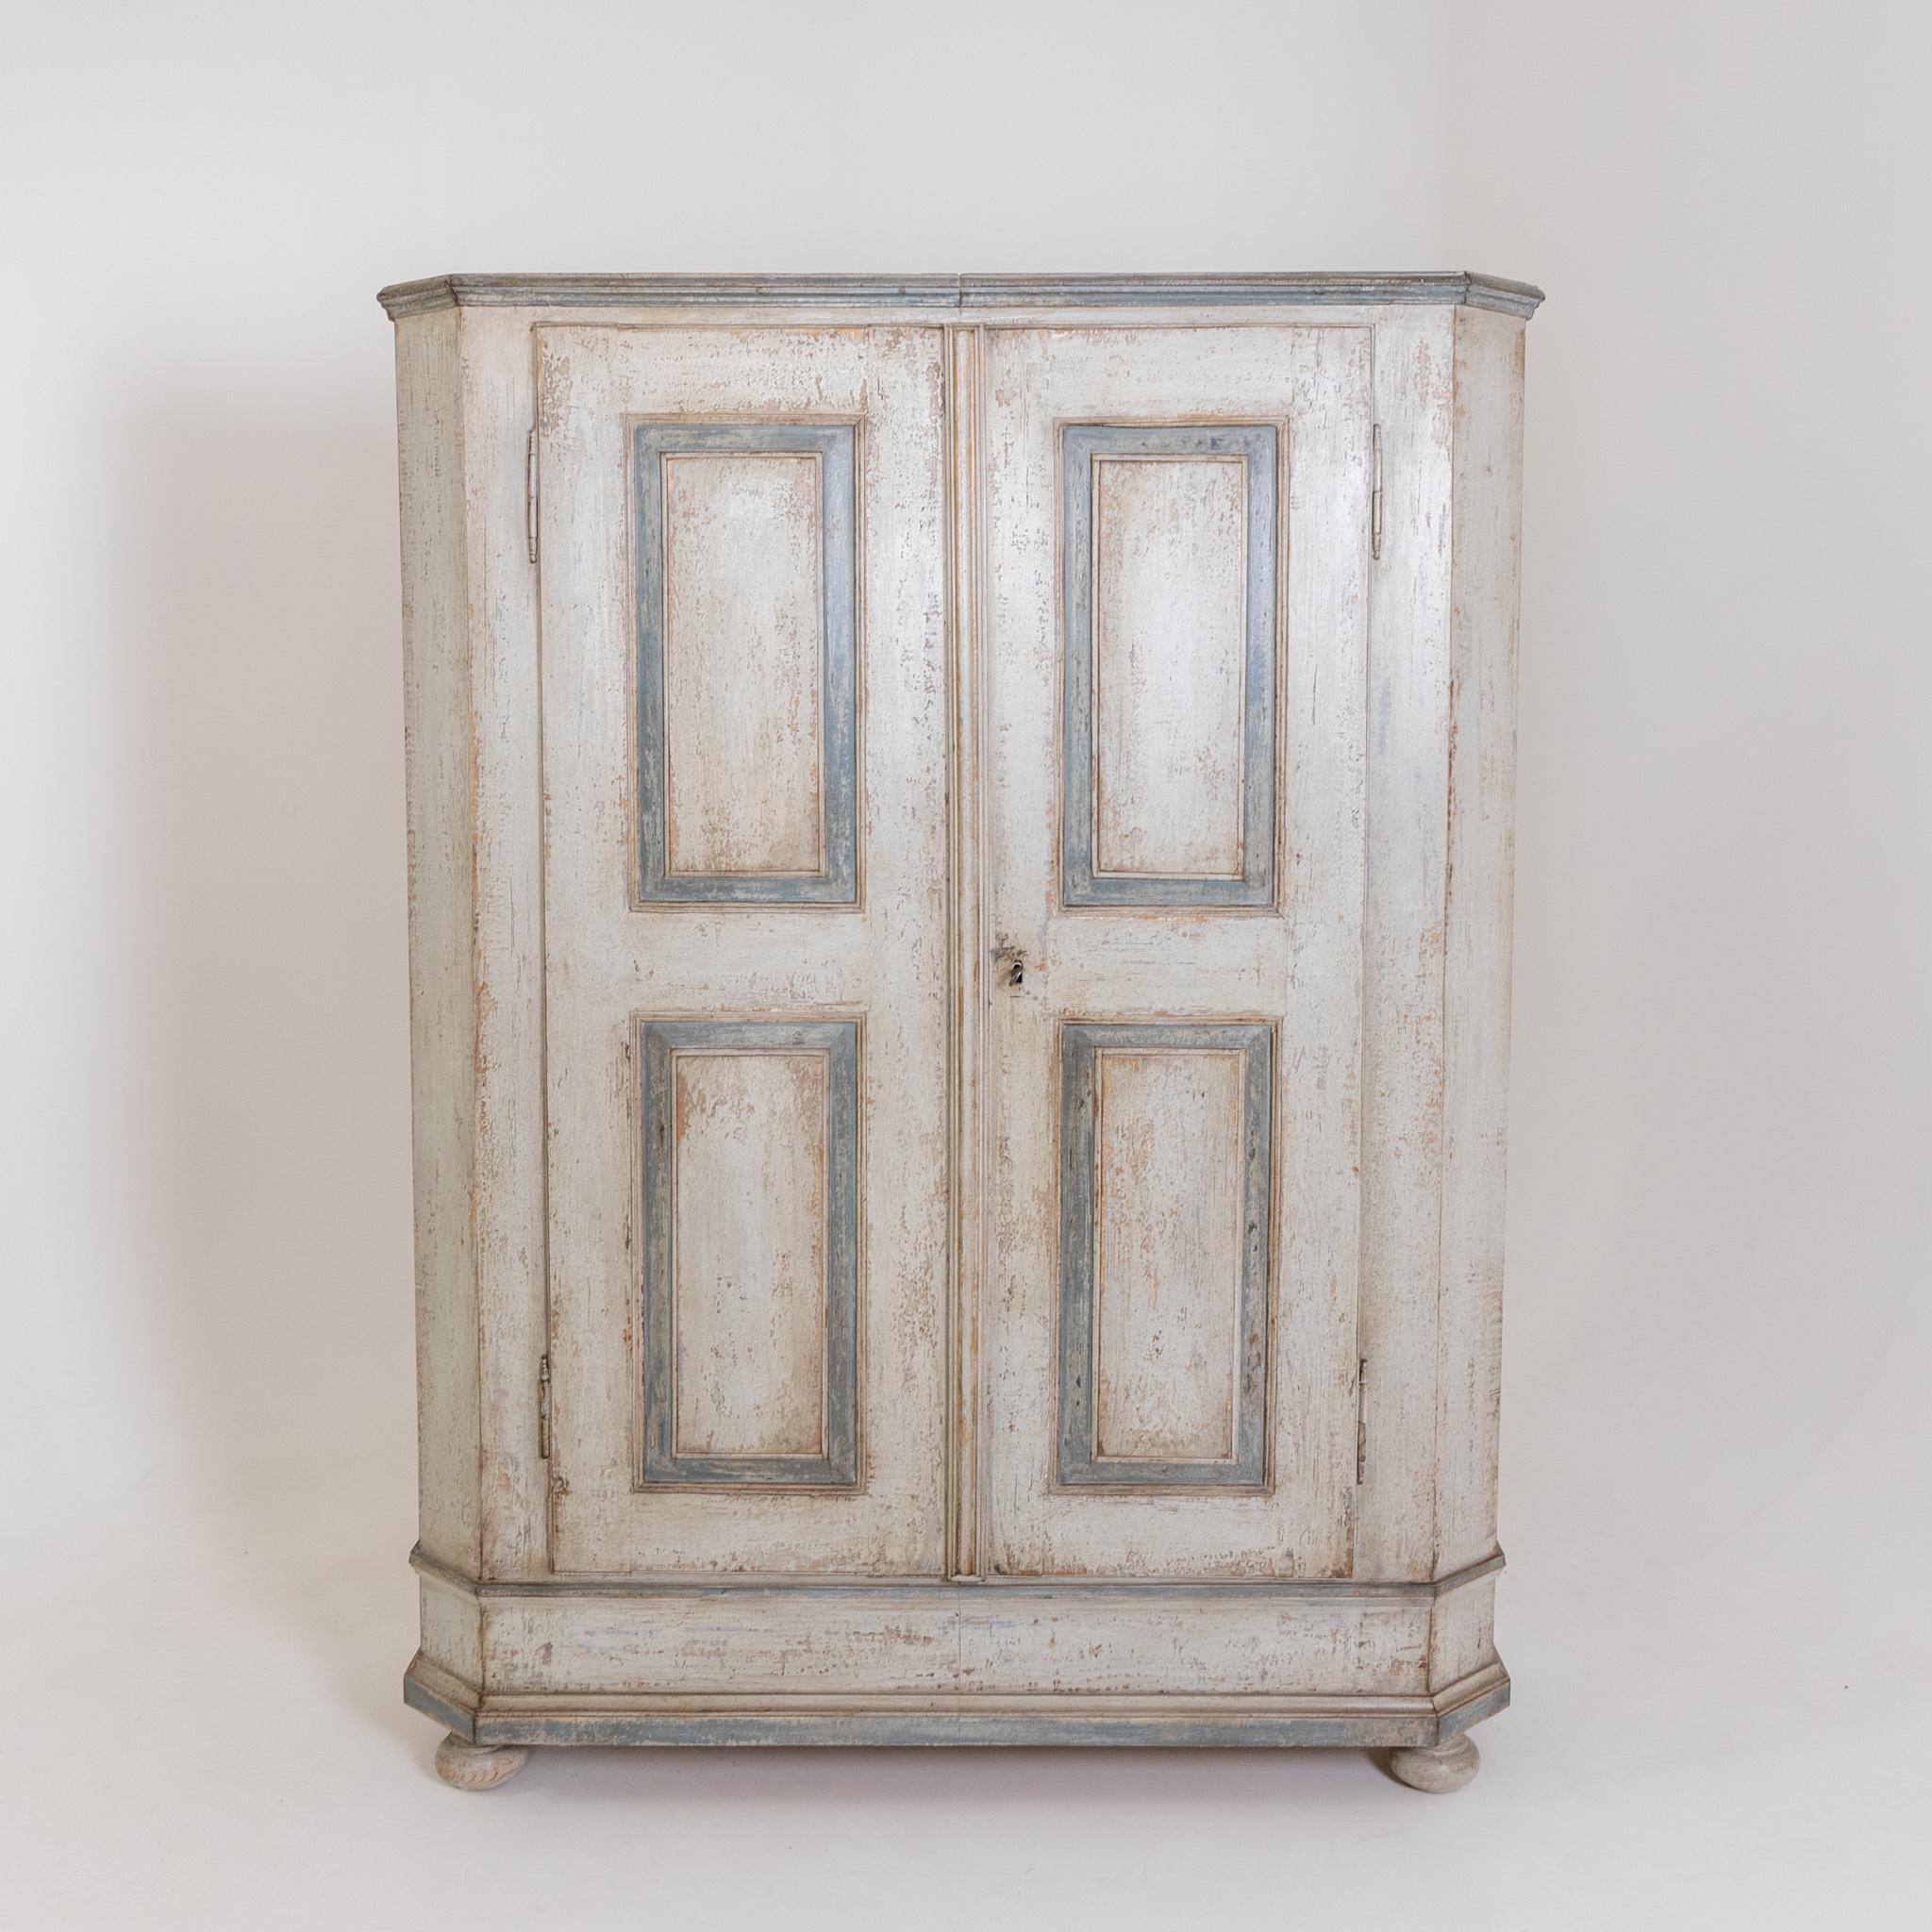 A two-door cabinet with light blue contrasting coffered details on the front and bevelled corners. The creamy white setting is new and has been decoratively rubbed through.